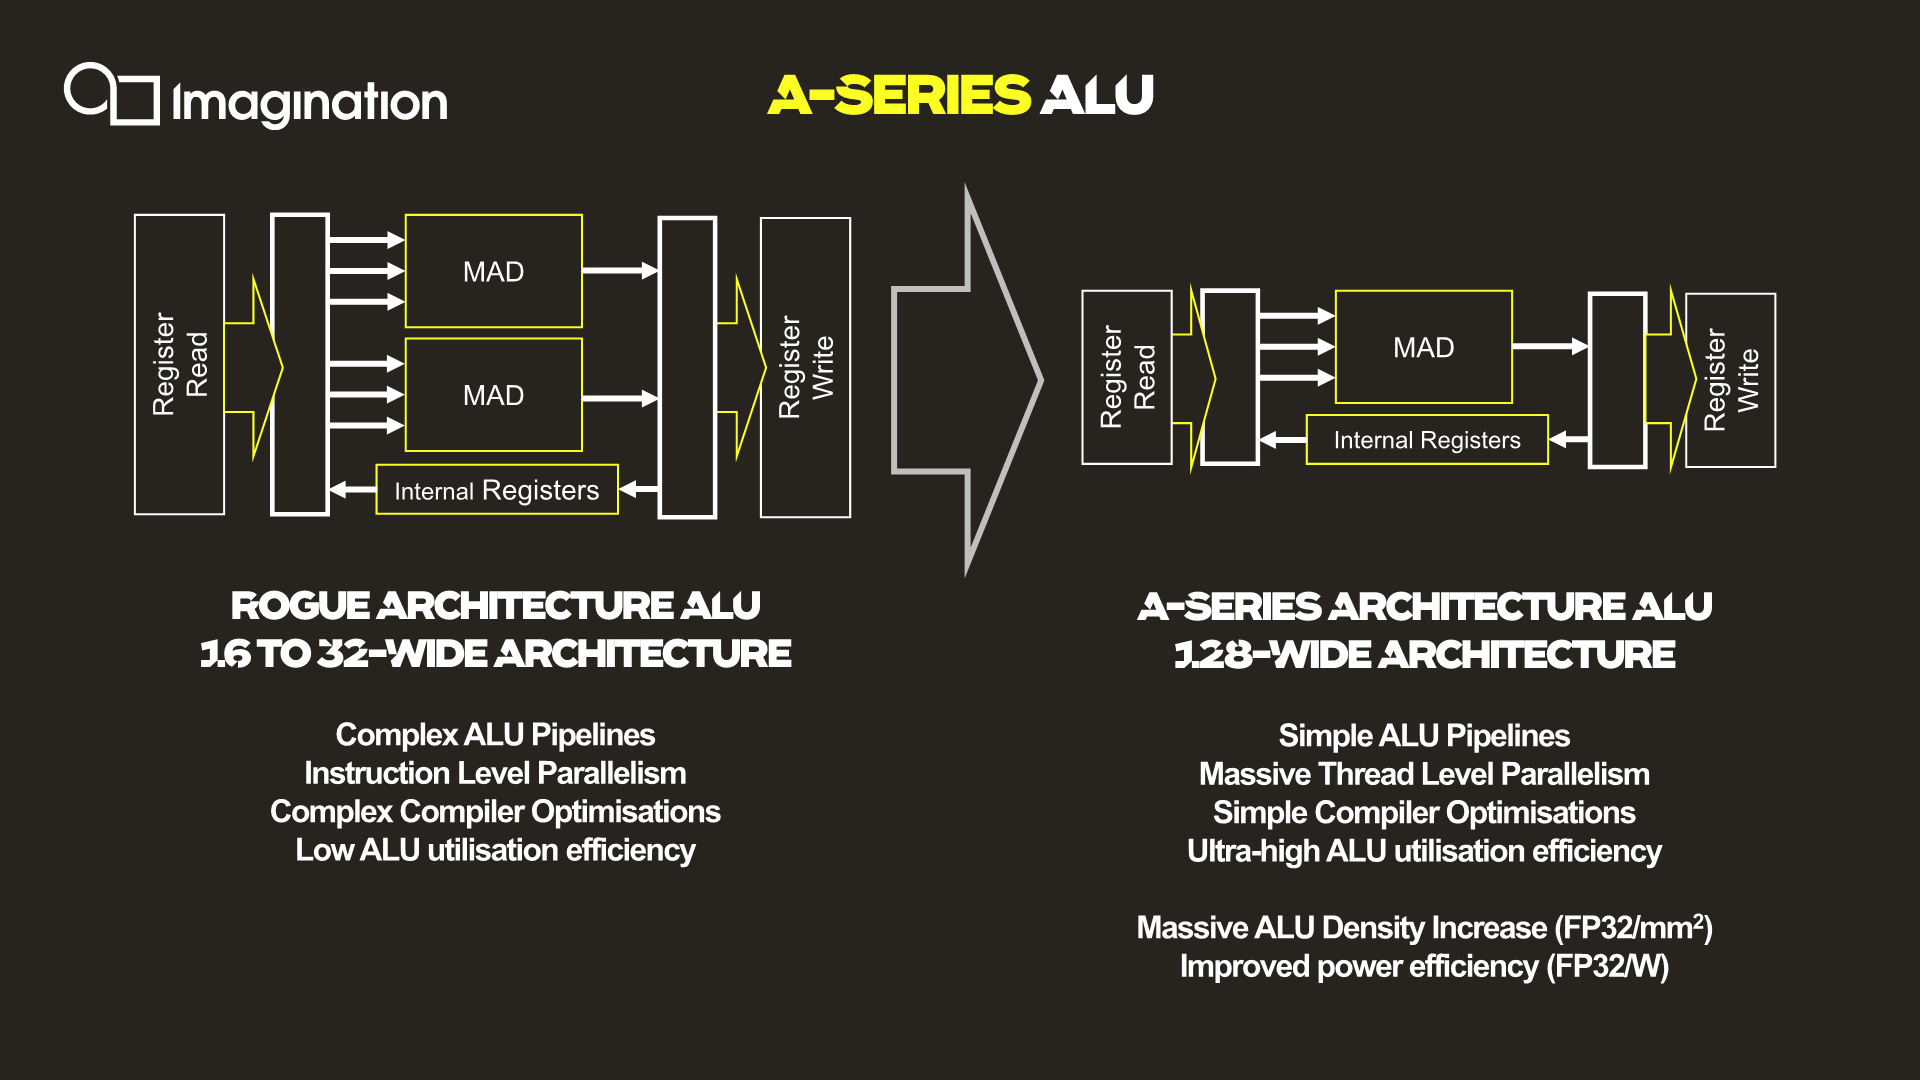 Gå ud Reaktor Bred vifte New ISA & ALUs: An Extremely Wide Architecture - Imagination Announces  A-Series GPU Architecture: "Most Important Launch in 15 Years"